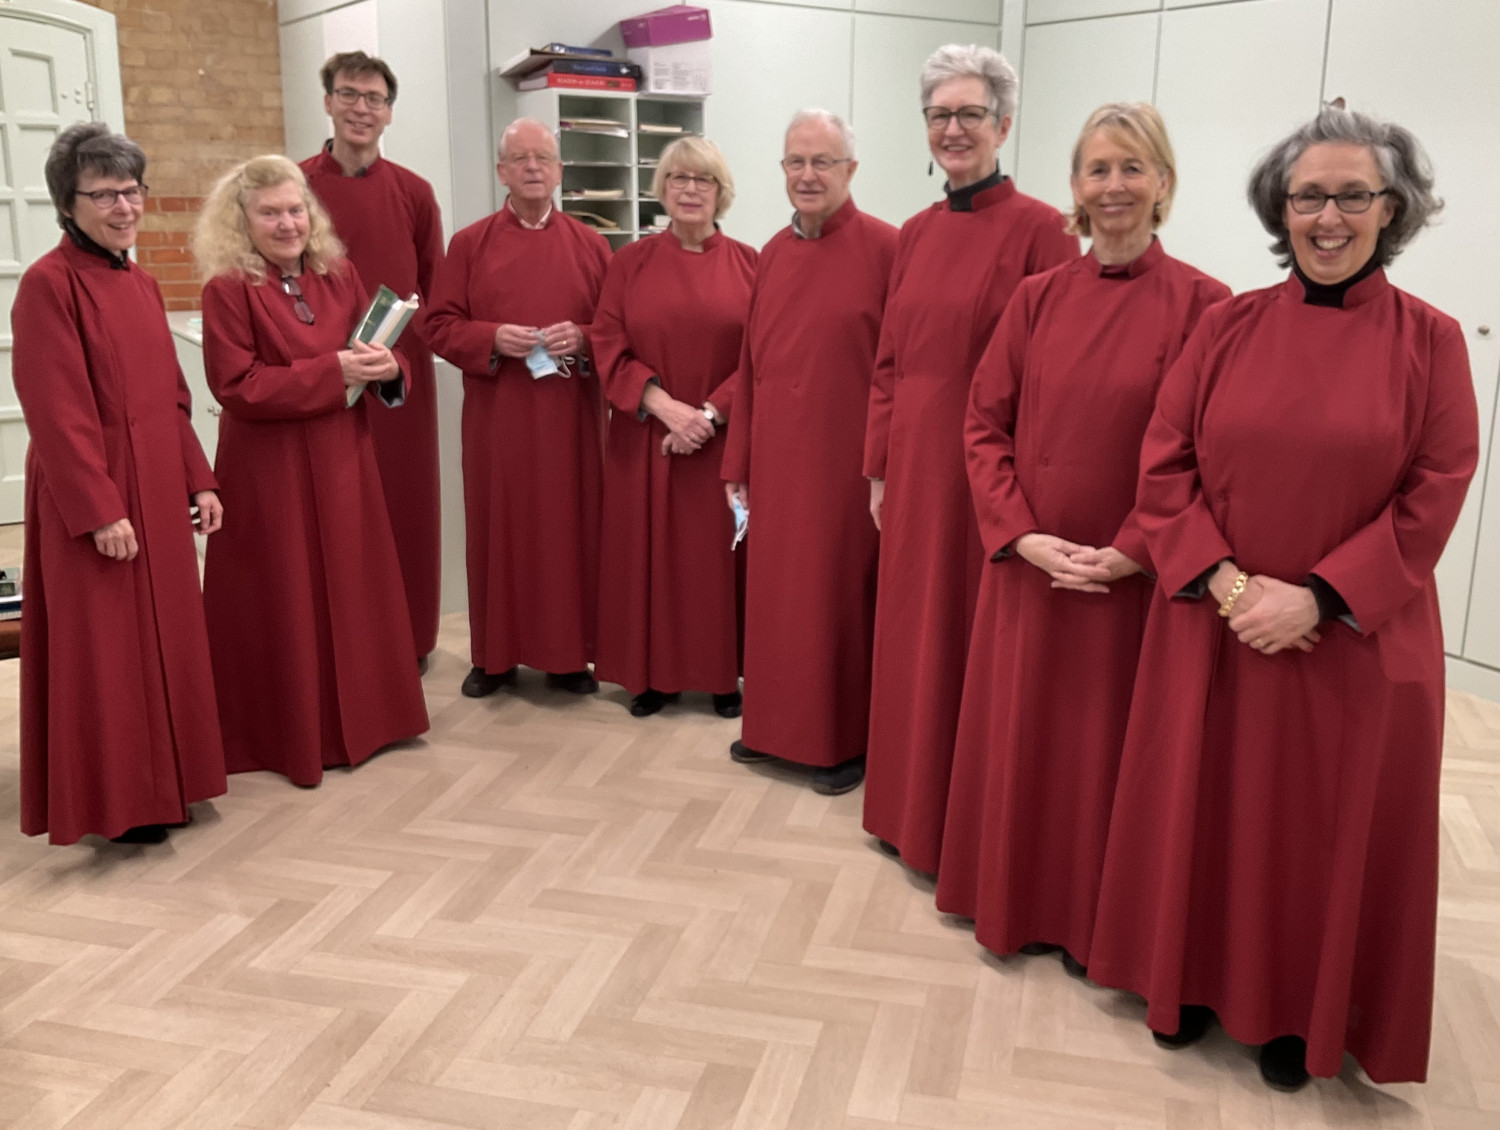 Some of St Martin's choir in their new cassocks